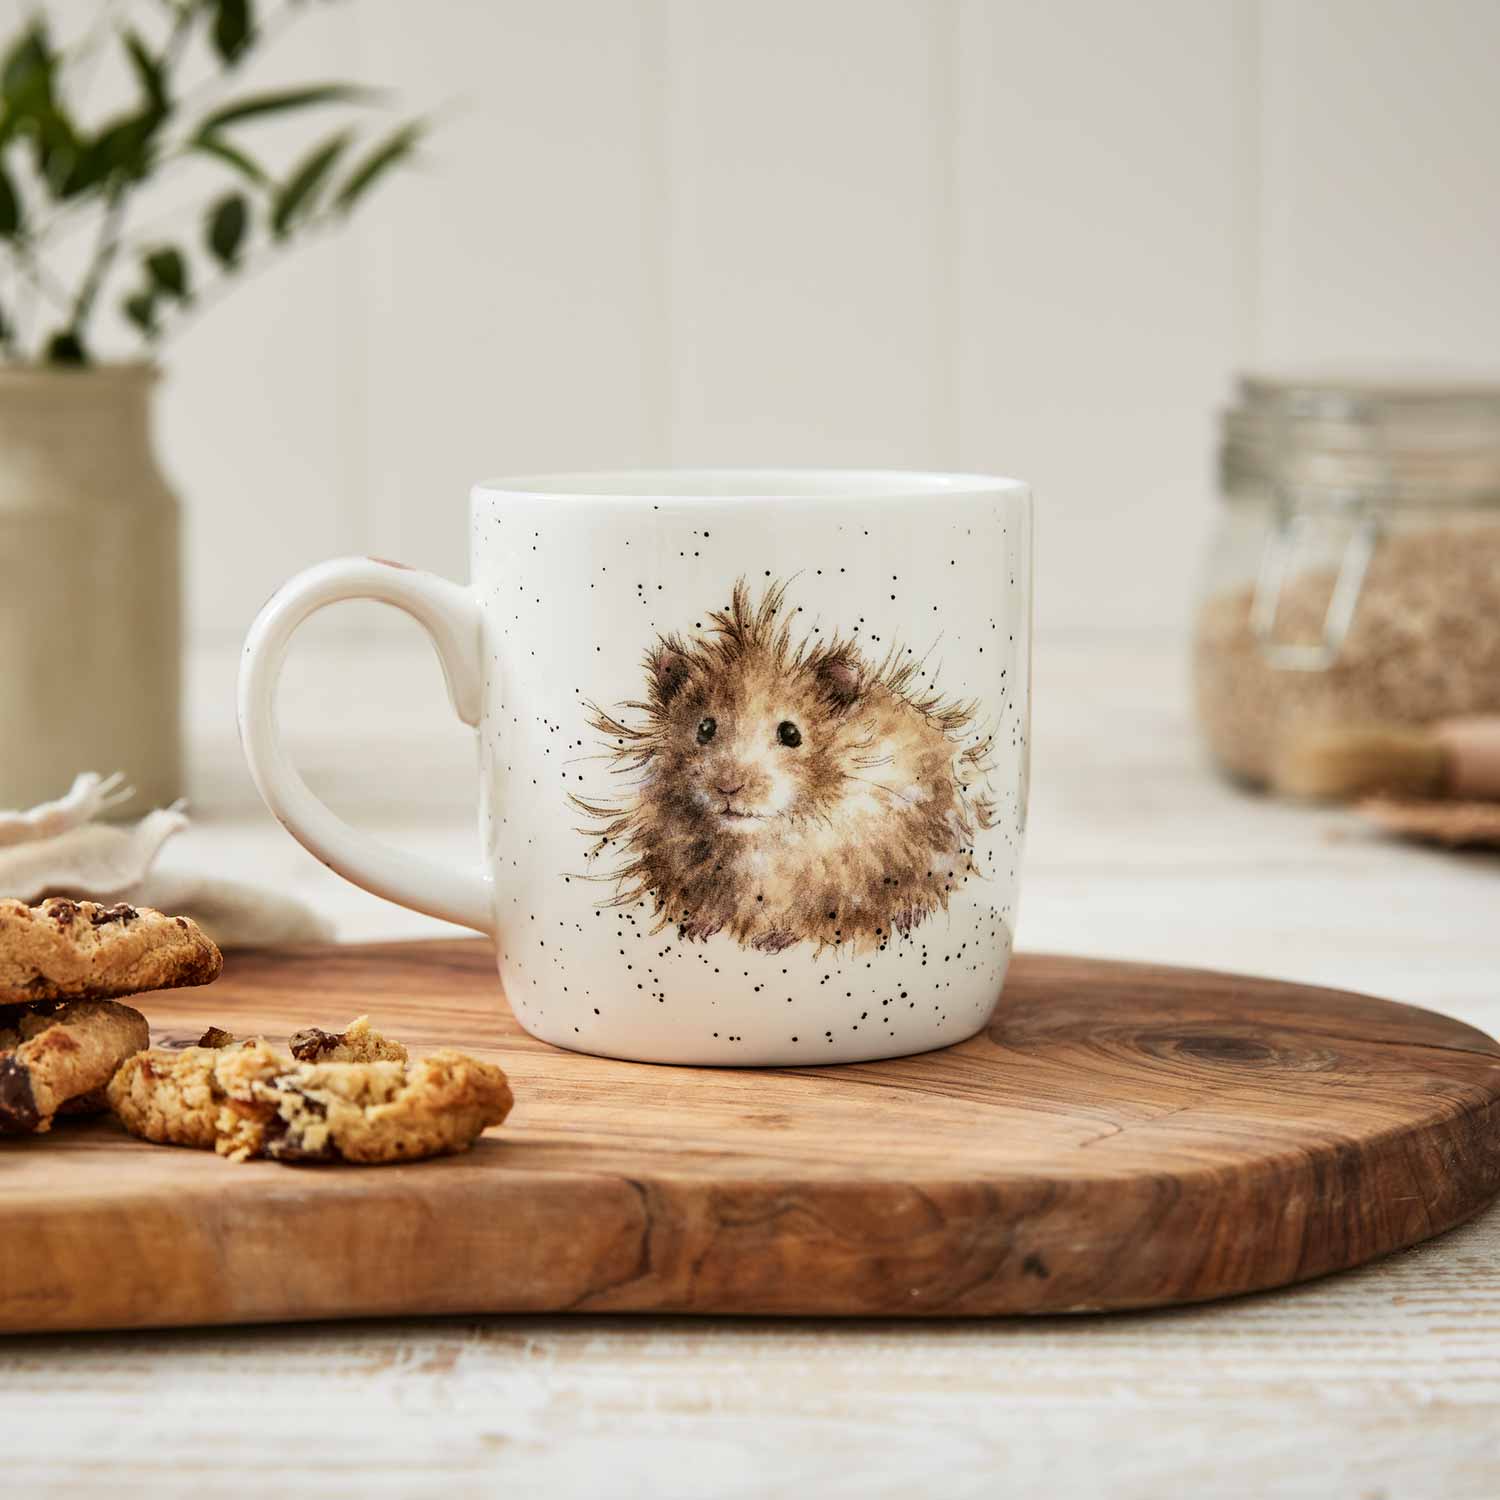 Diet Starts Tomorrow 14 Ounce Mug (Hamster) image number null